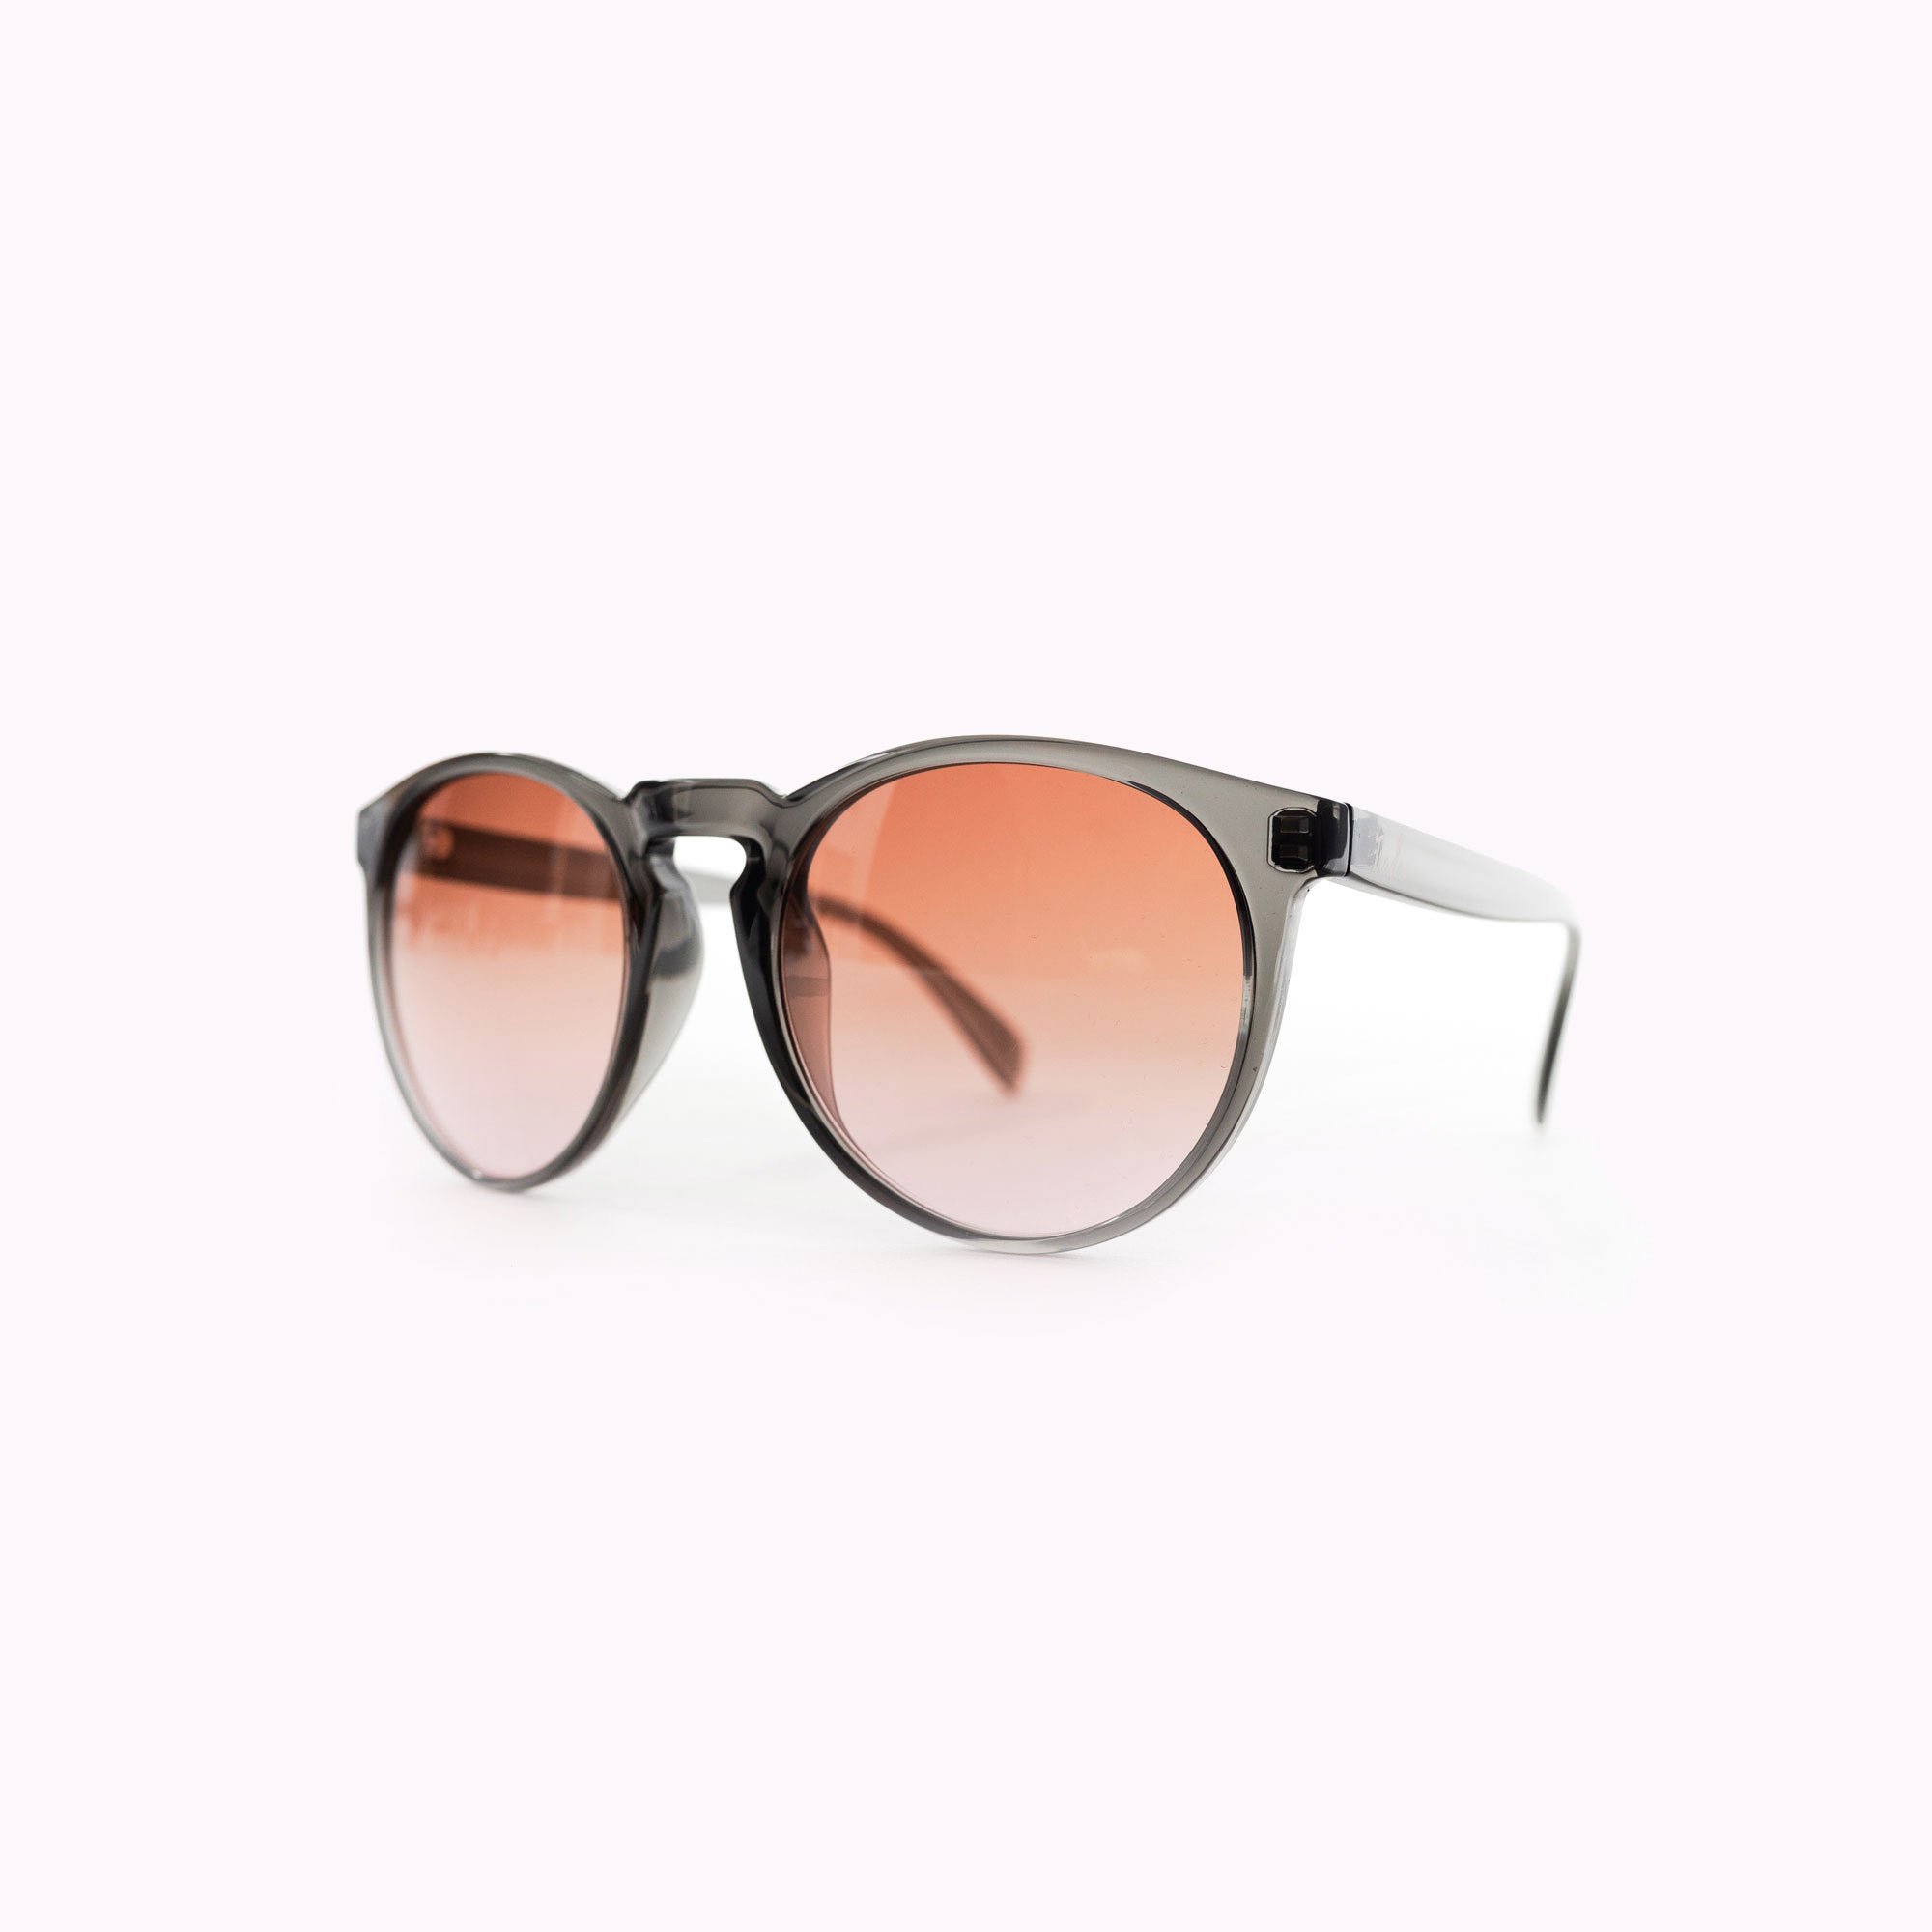 Sunglasses that are made in Italy by hand with a black oversized frame